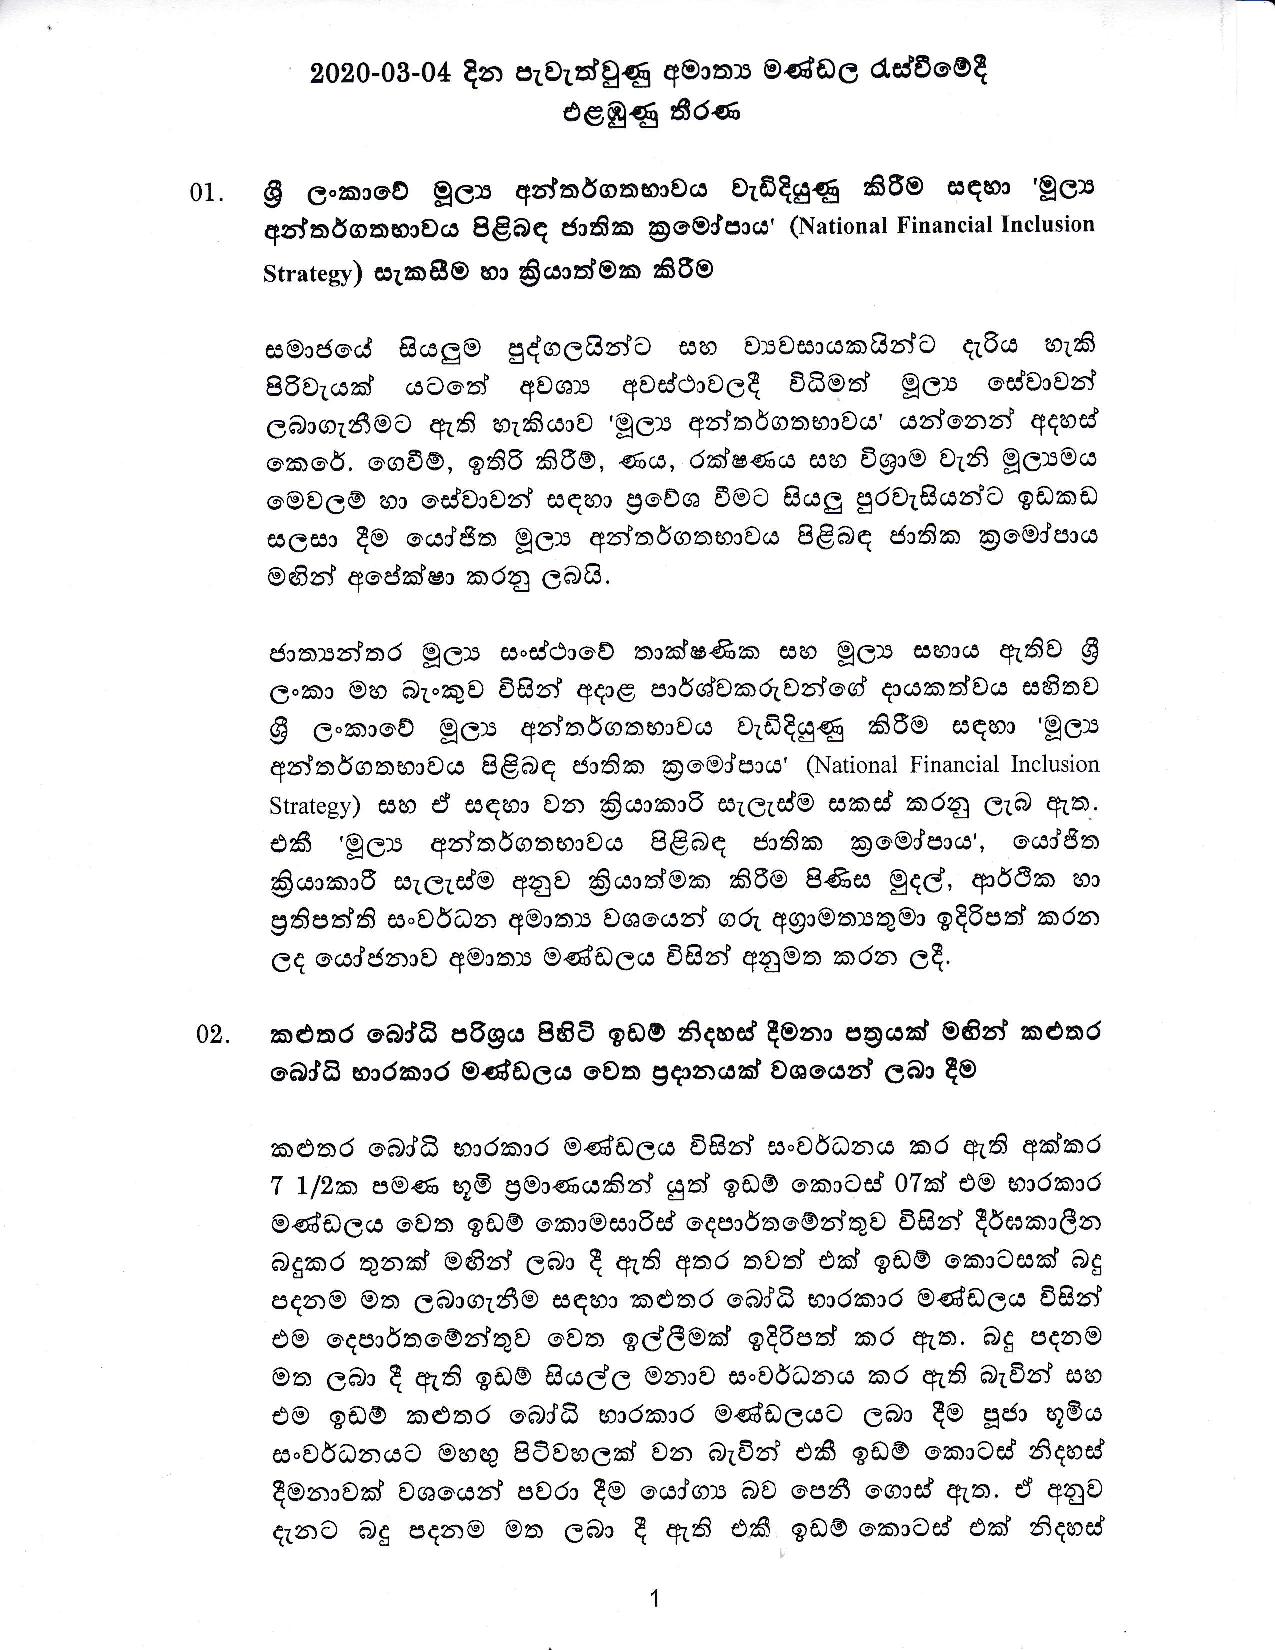 Cabinet Decision on 04.03.2020 page 001